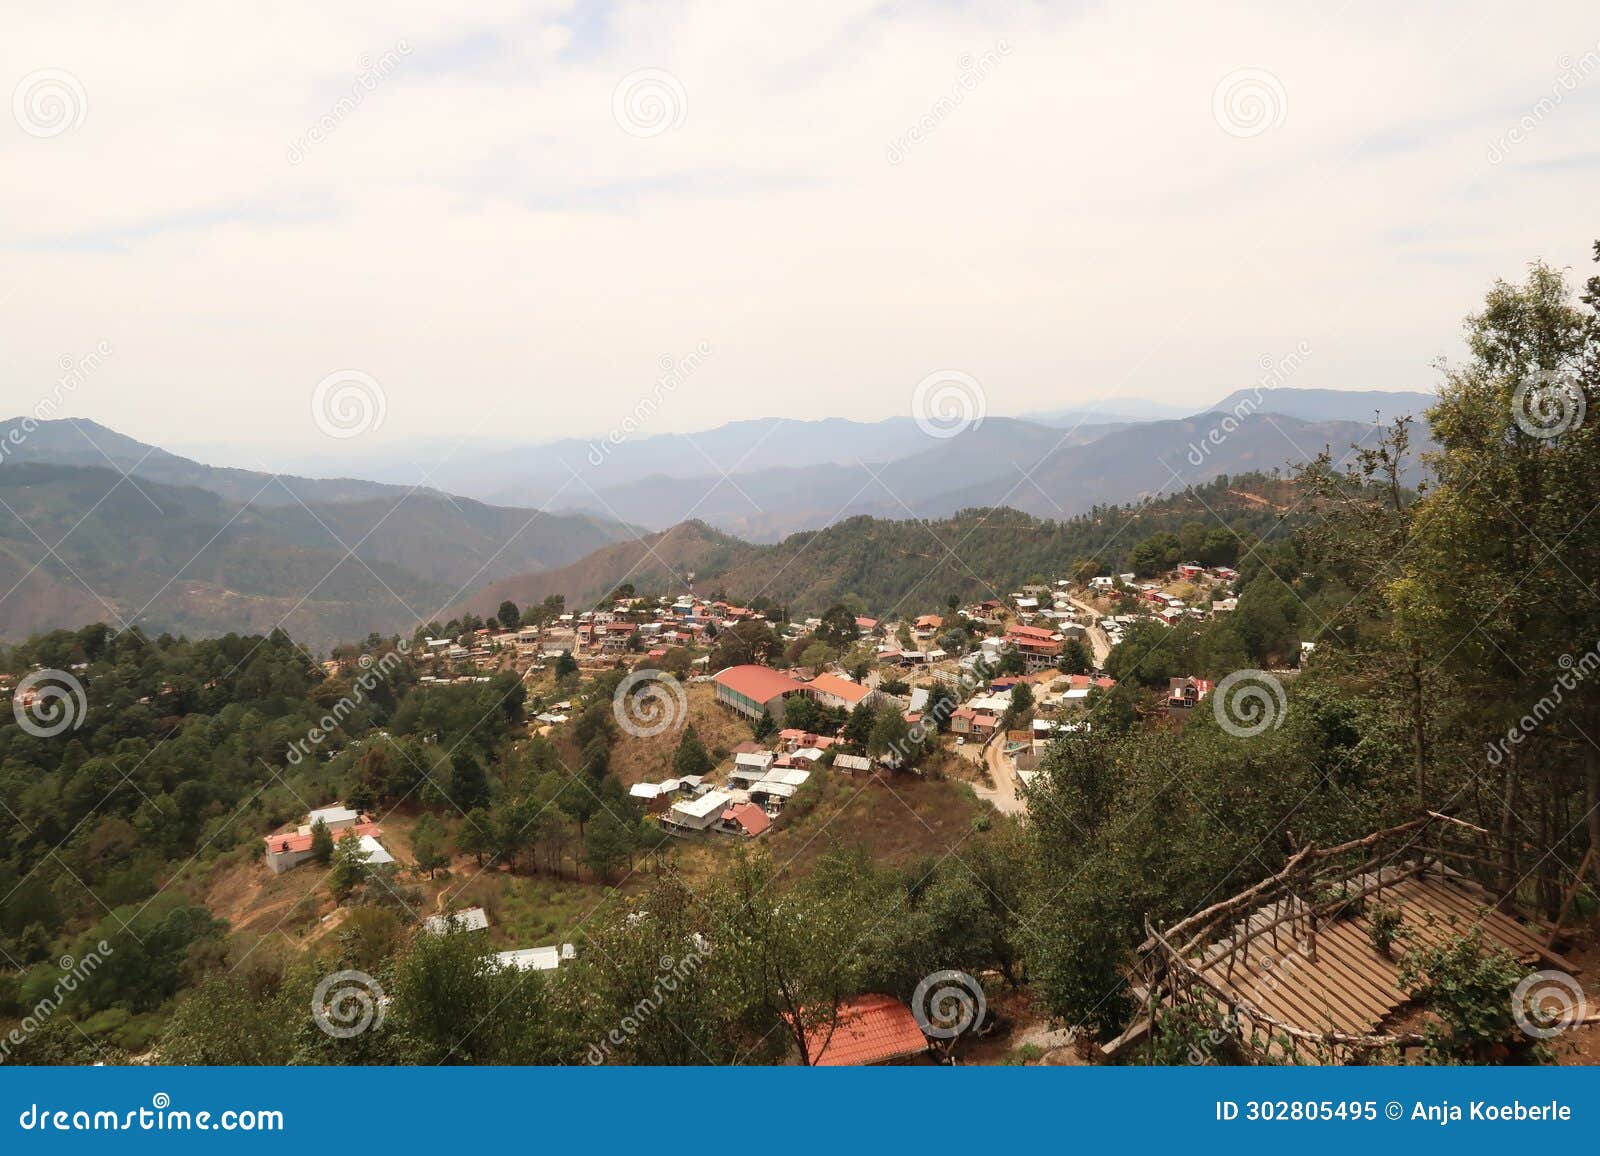 view from a view point mirador onto san jose del pacifico, a small village in oaxaca, surrounded by a dense forest and hills,